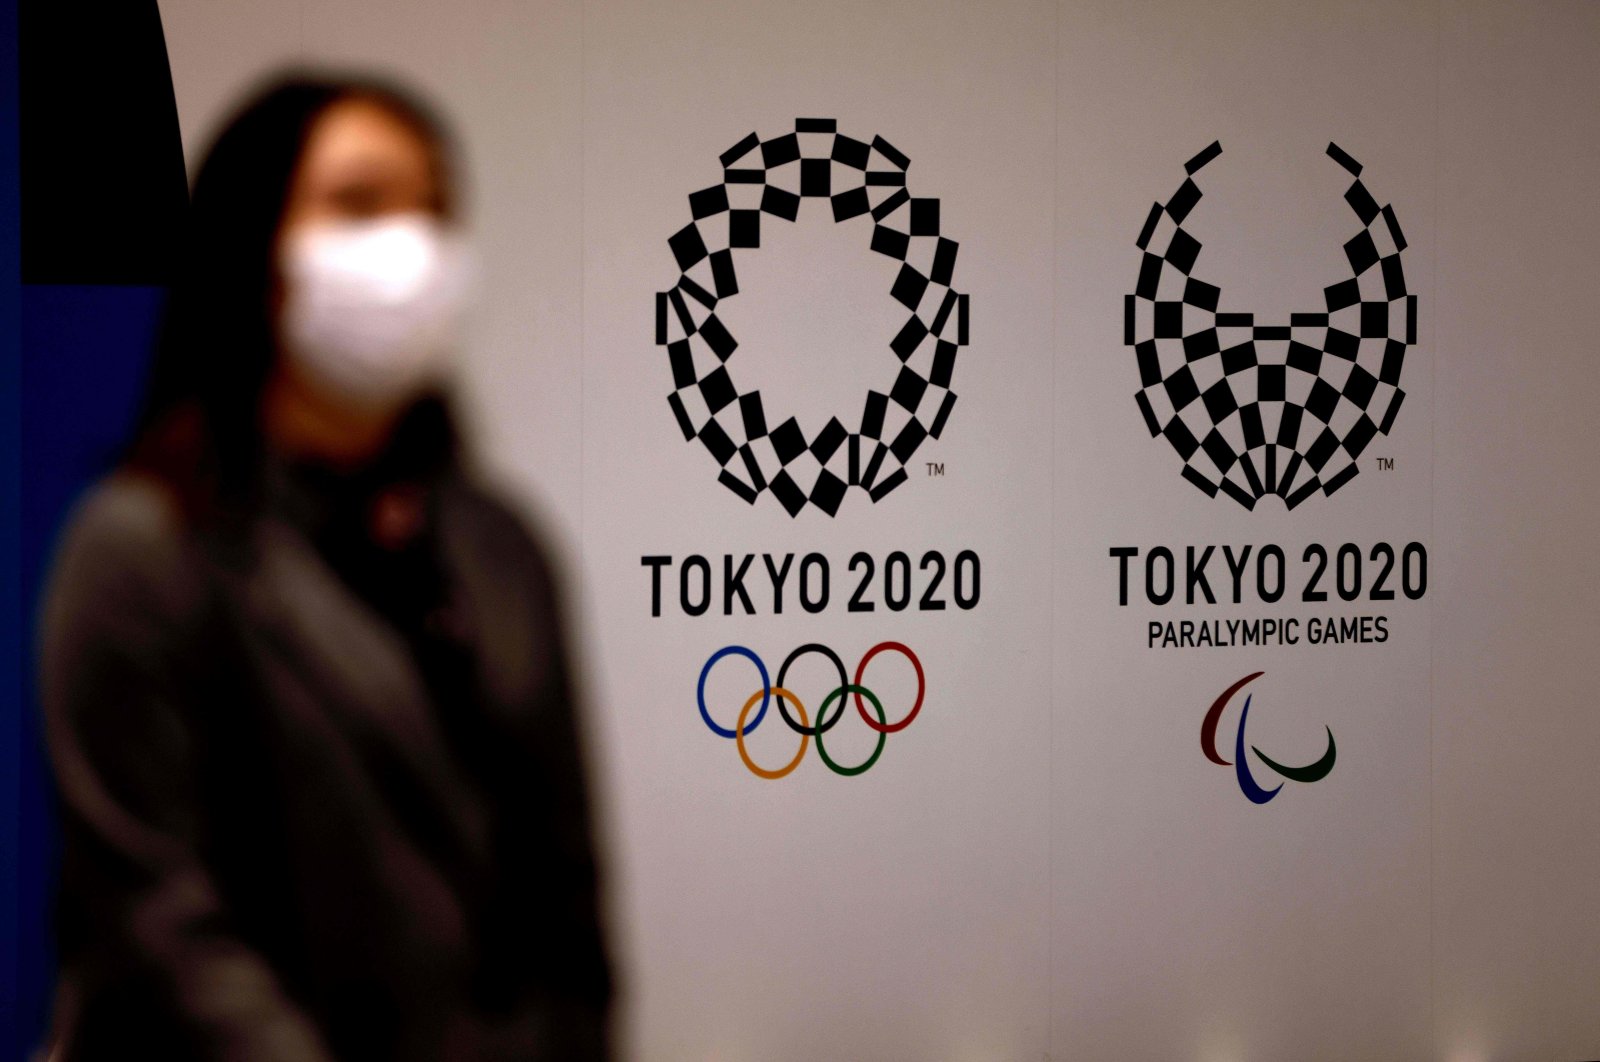 A woman wearing a face mask walks past Tokyo 2020 Olympic and Paralympic Games' logos in Tokyo, Japan, Feb. 2, 2021. (AFP Photo)